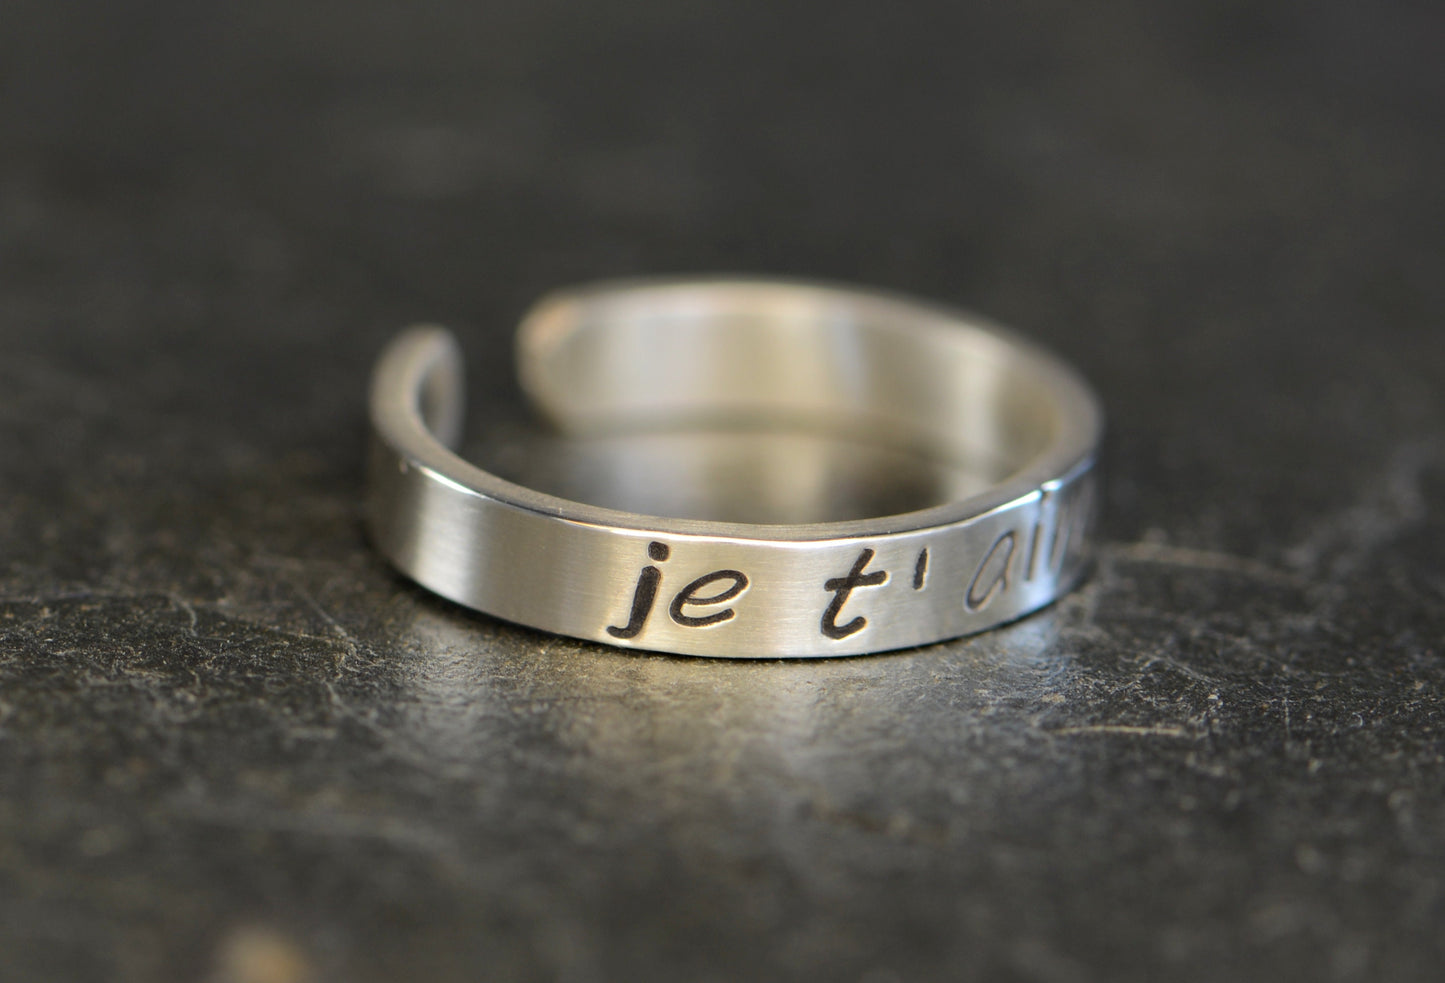 Je t’amine Sterling Silver Toe Ring handcrafted in French for Love